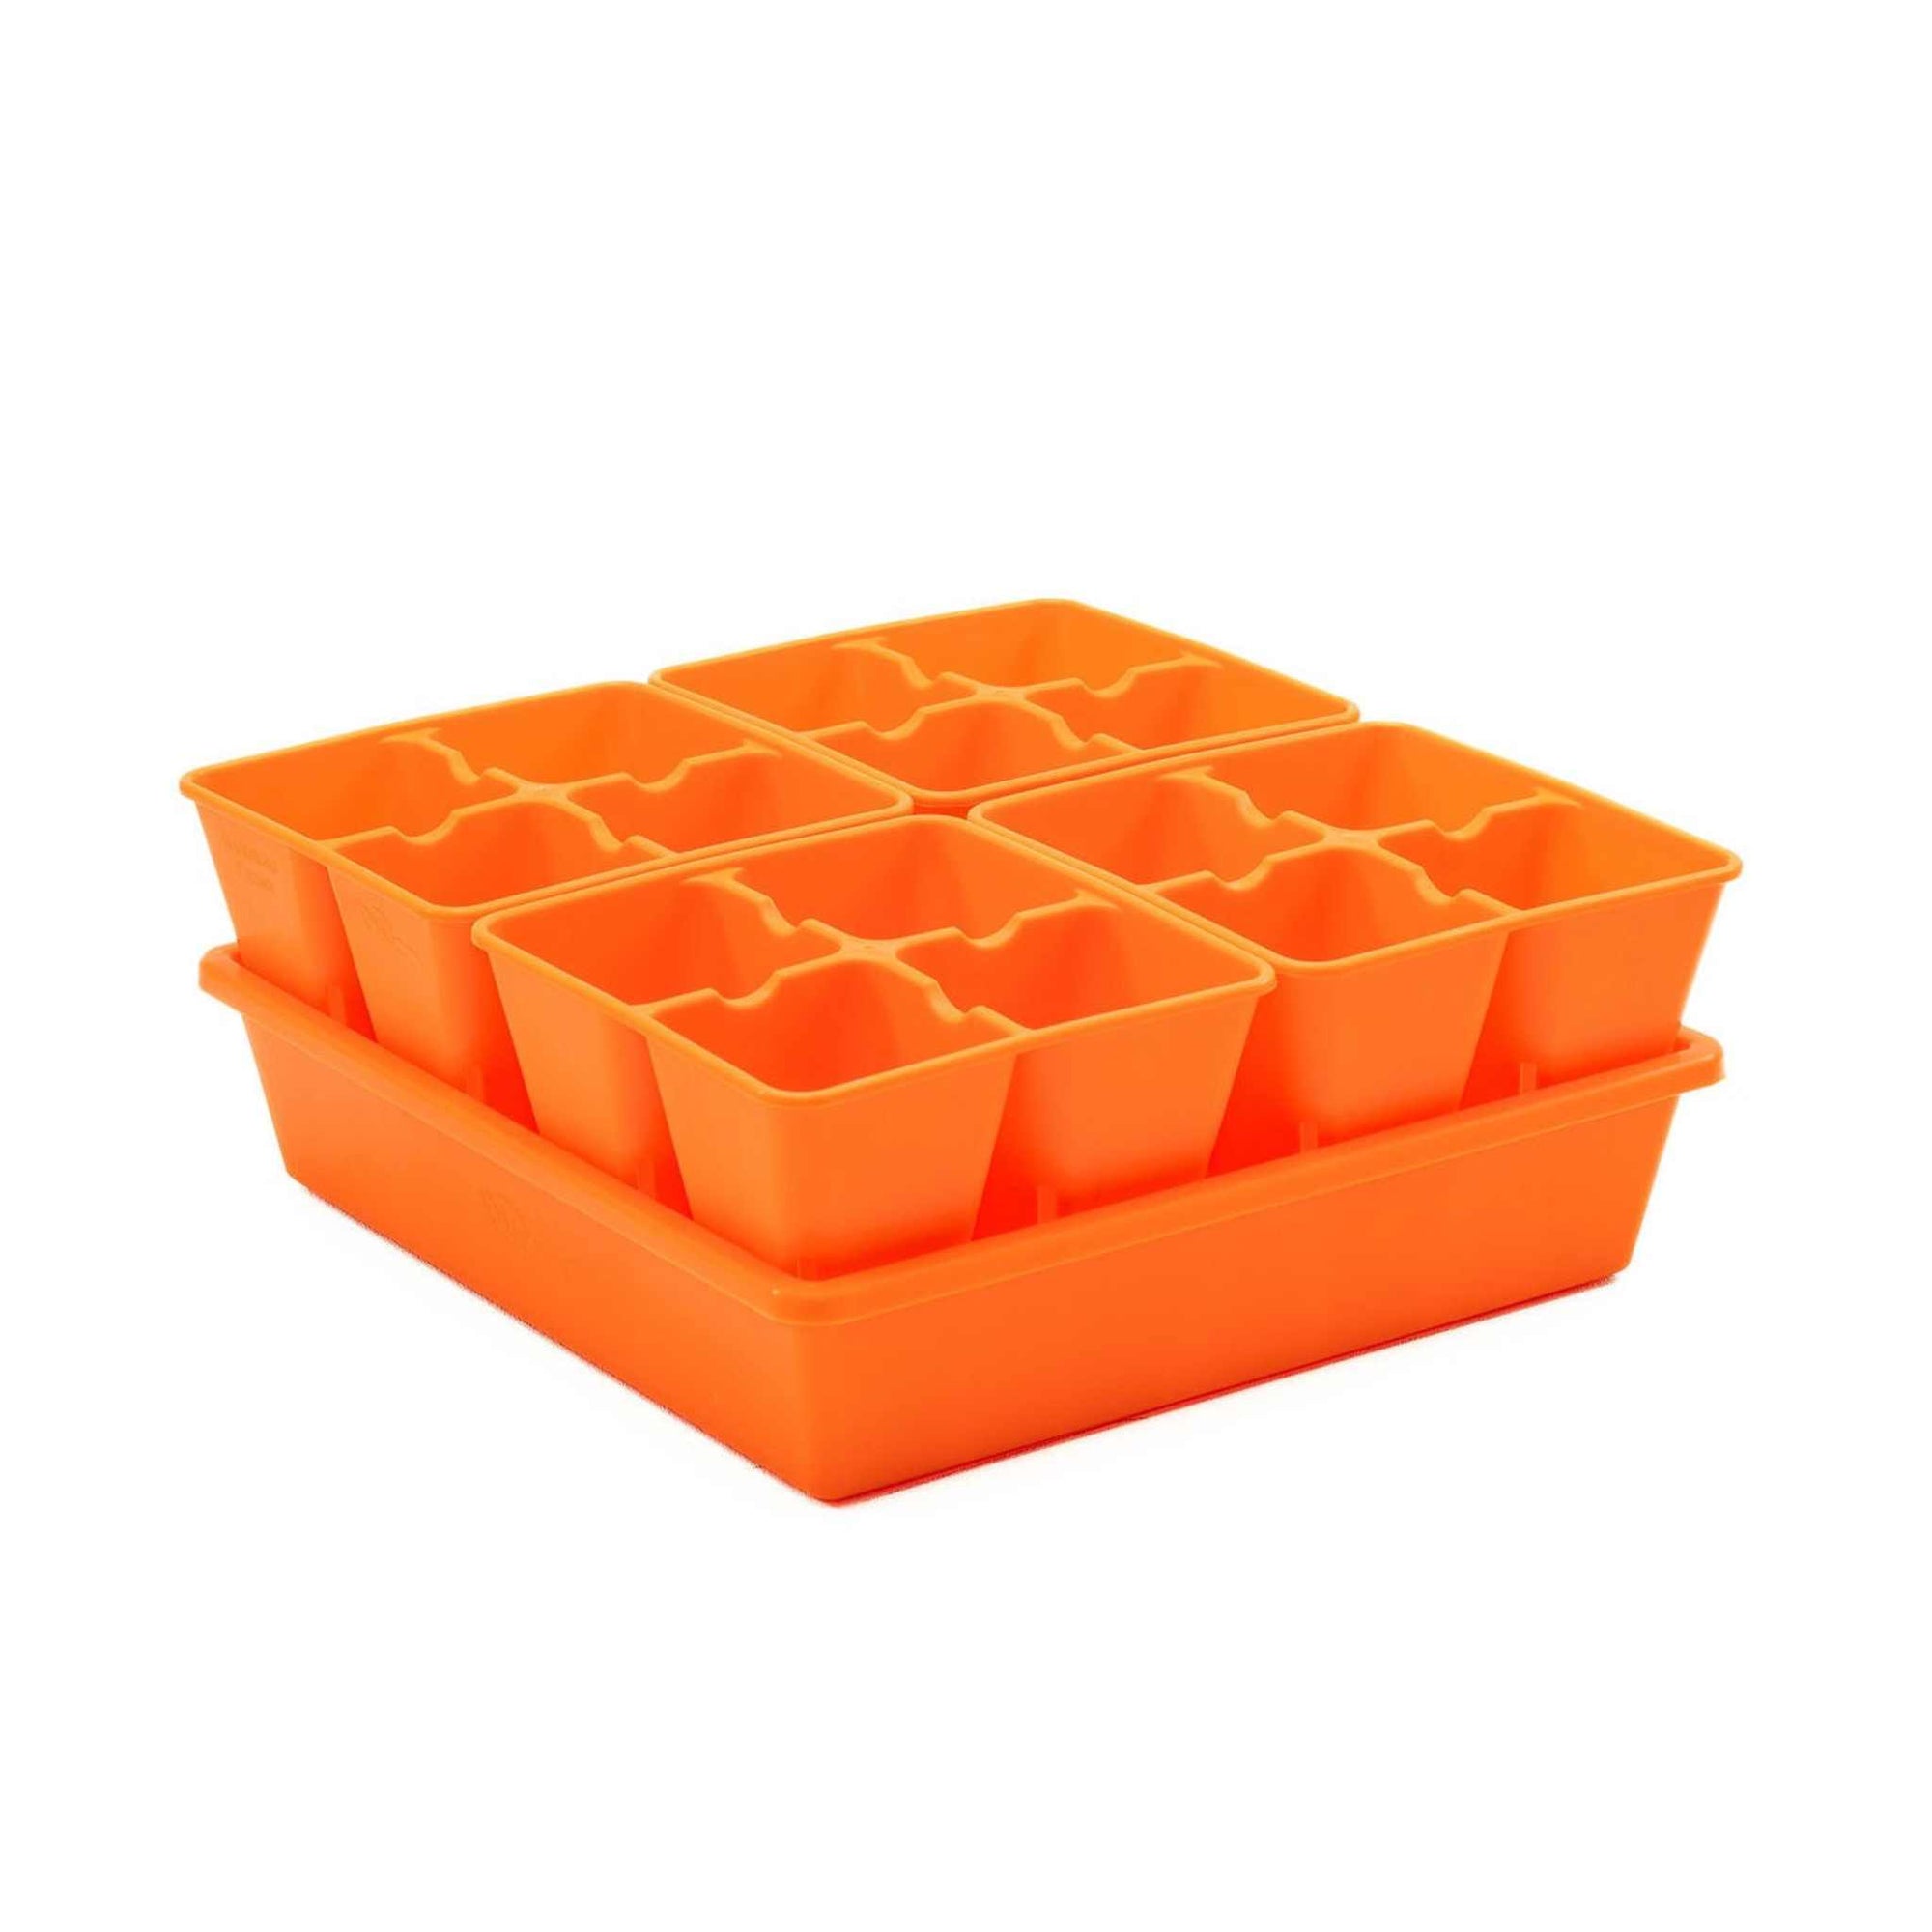 Orange 4 cell plug inserts in a 1010 tray